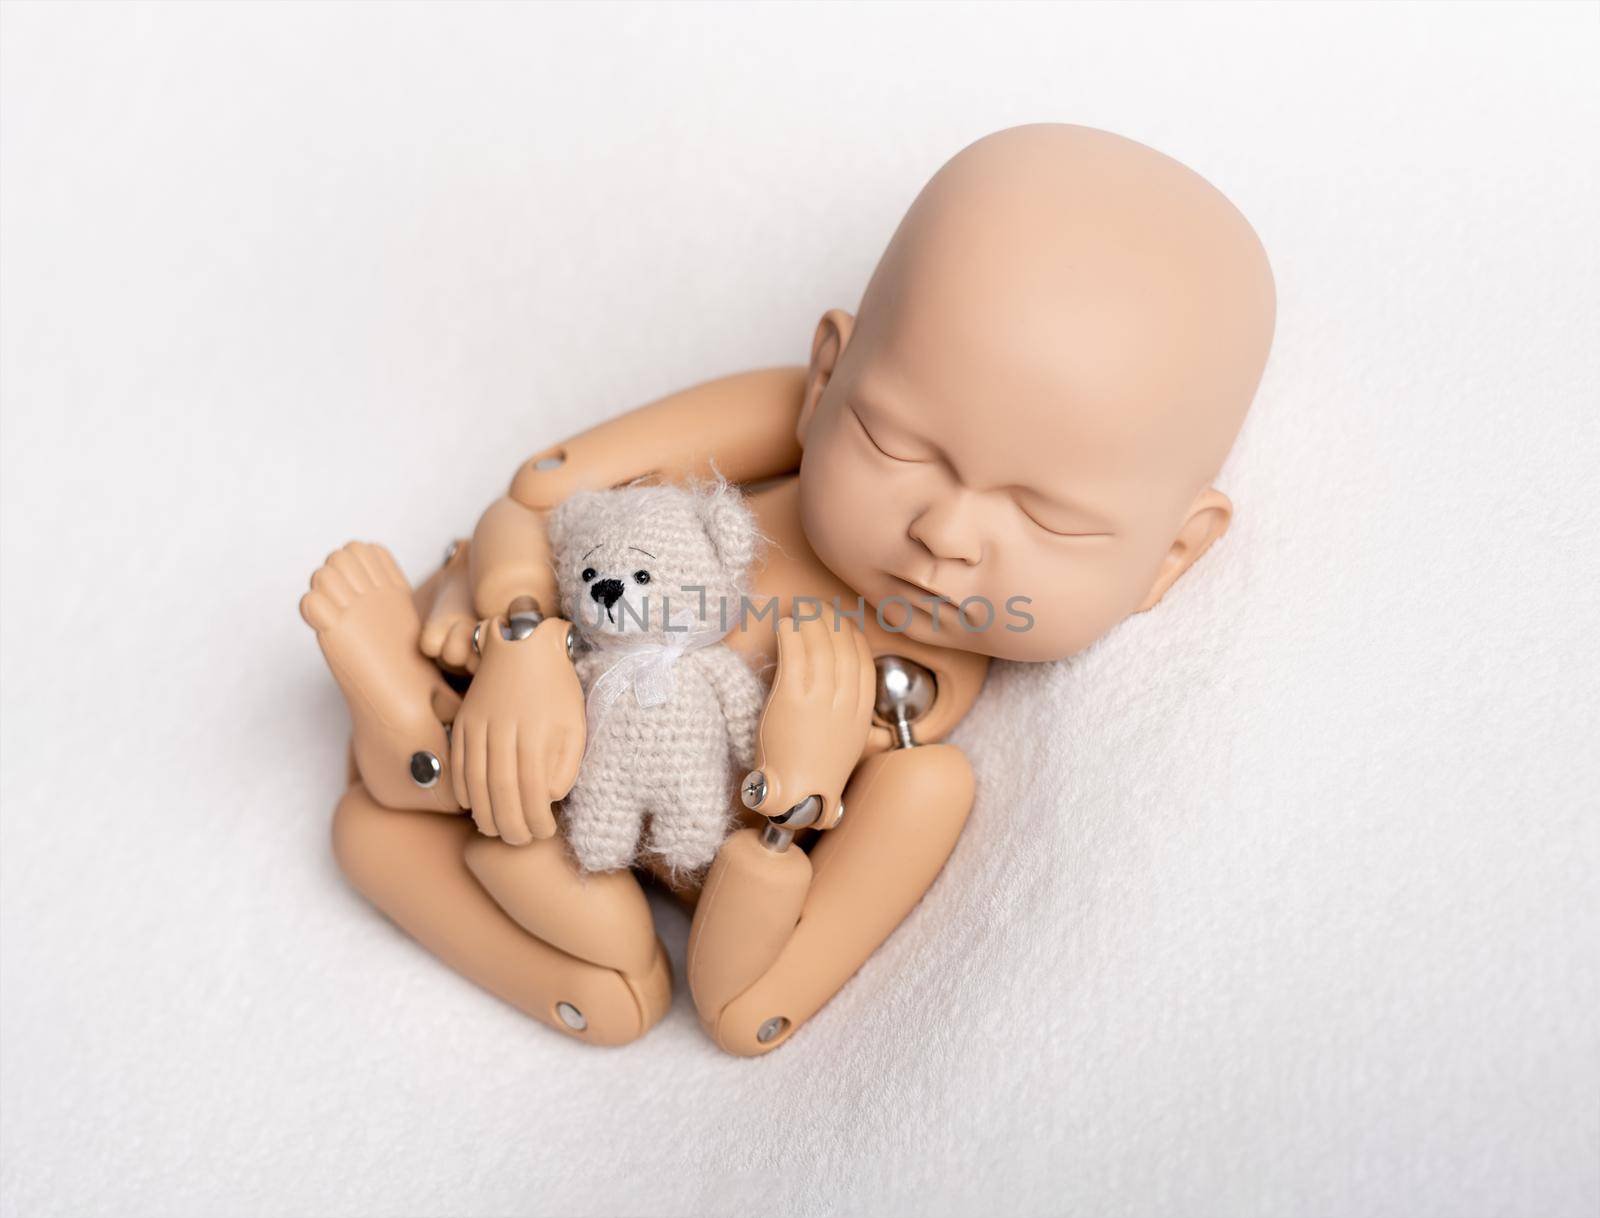 Toy of newborn baby for photo practice by tan4ikk1